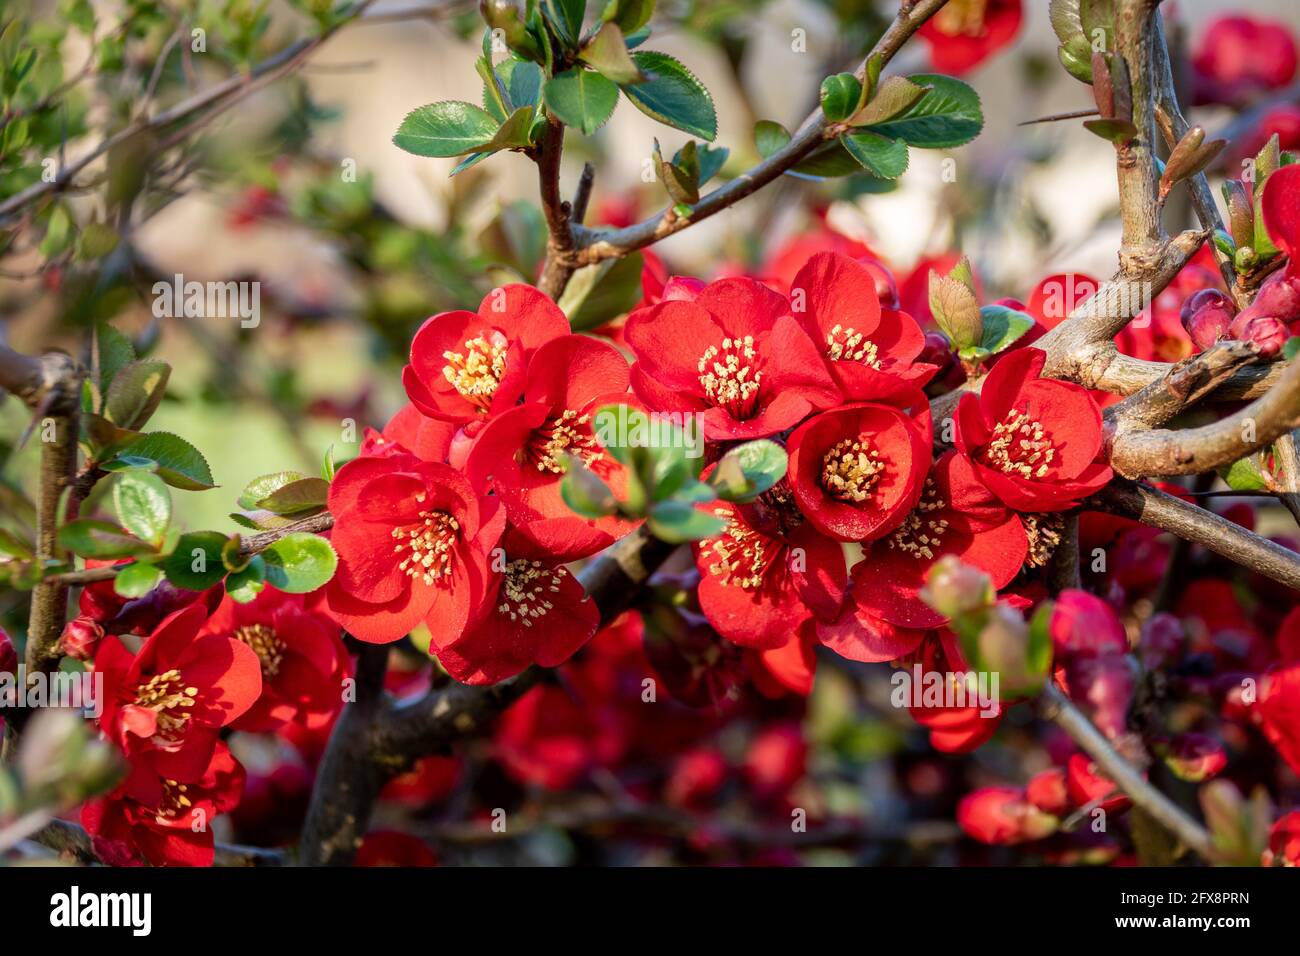 Bright red flowers of a Flowering quince, Chaenomeles speciosa, shrub.  a thorny deciduous or semi-evergreen shrub also known as Japanese quince or Ch Stock Photo